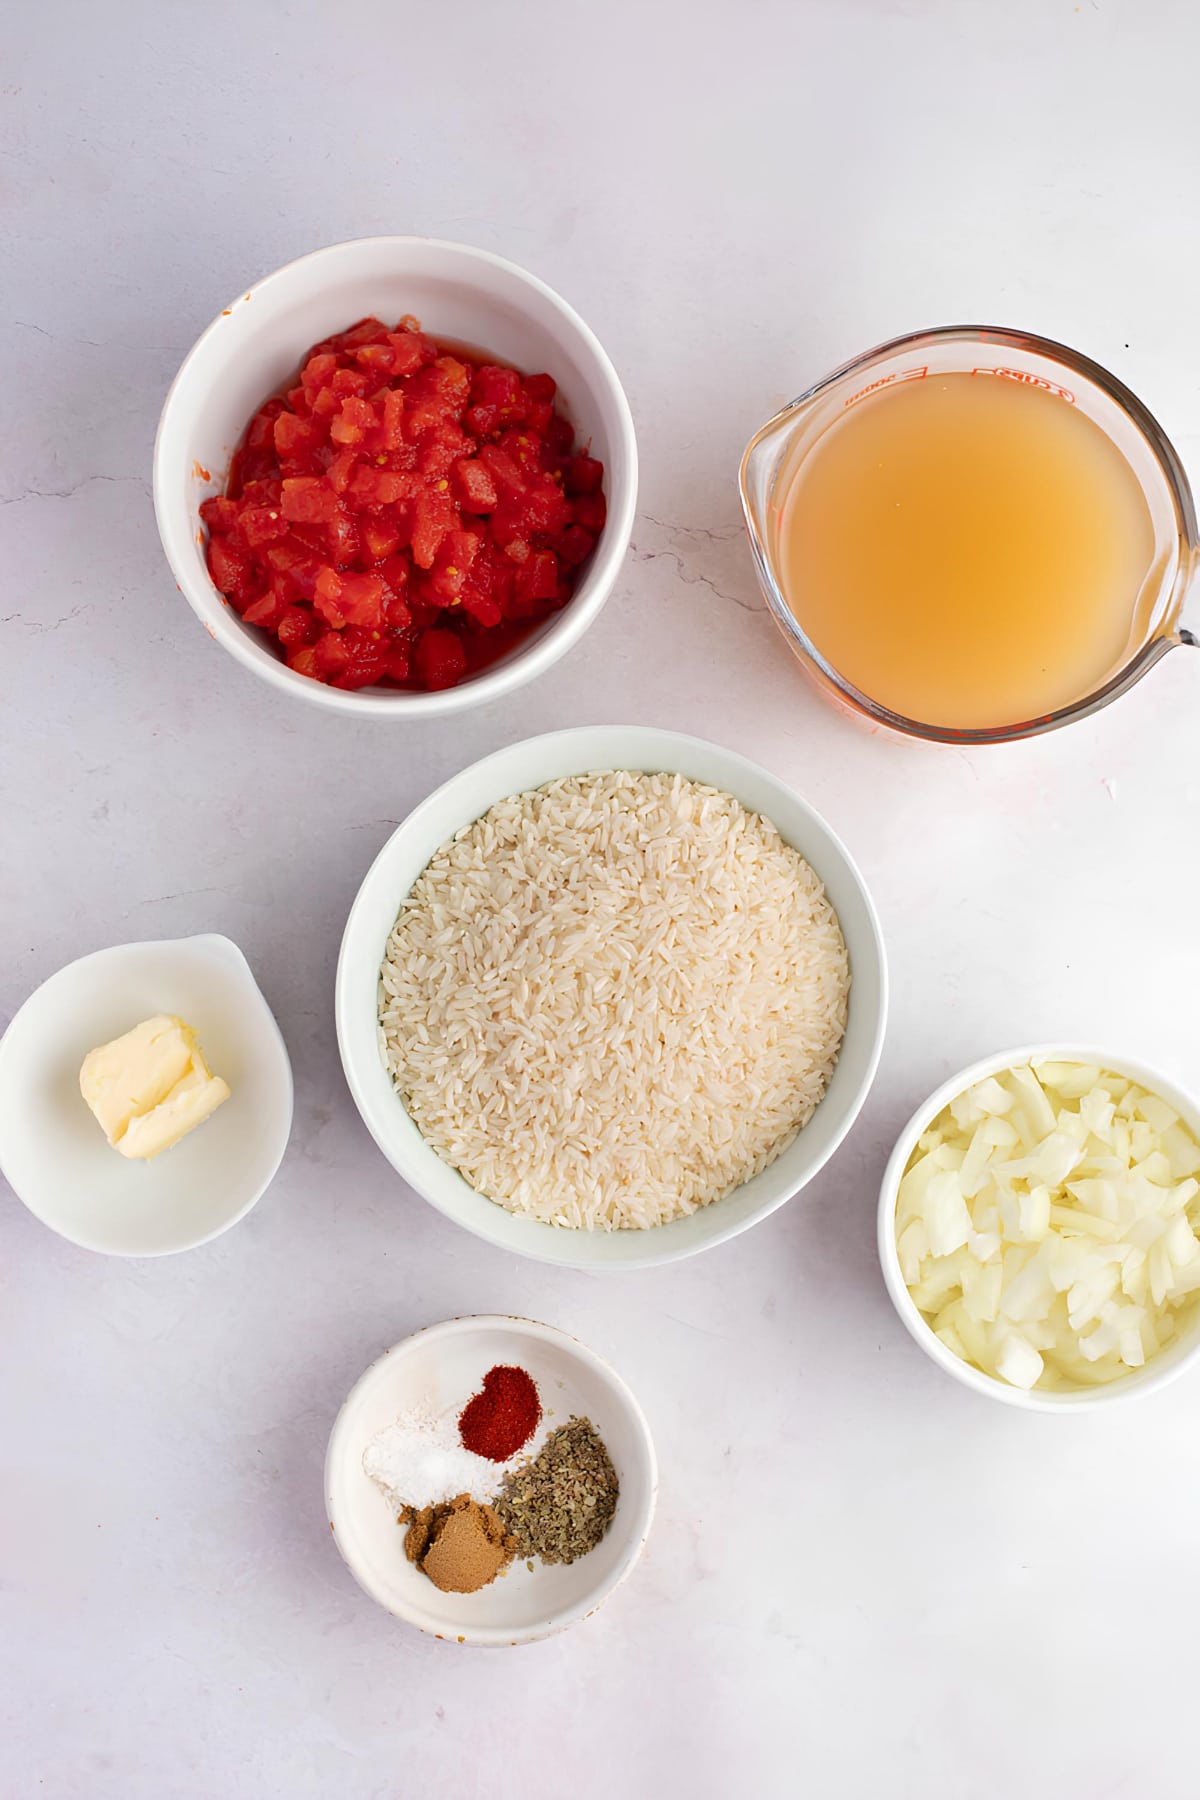 Spanish Rice Ingredients: Butter, Onion, Garlic, Long Grain Rice, Diced Tomatoes, Chicken Broth and Seasonings